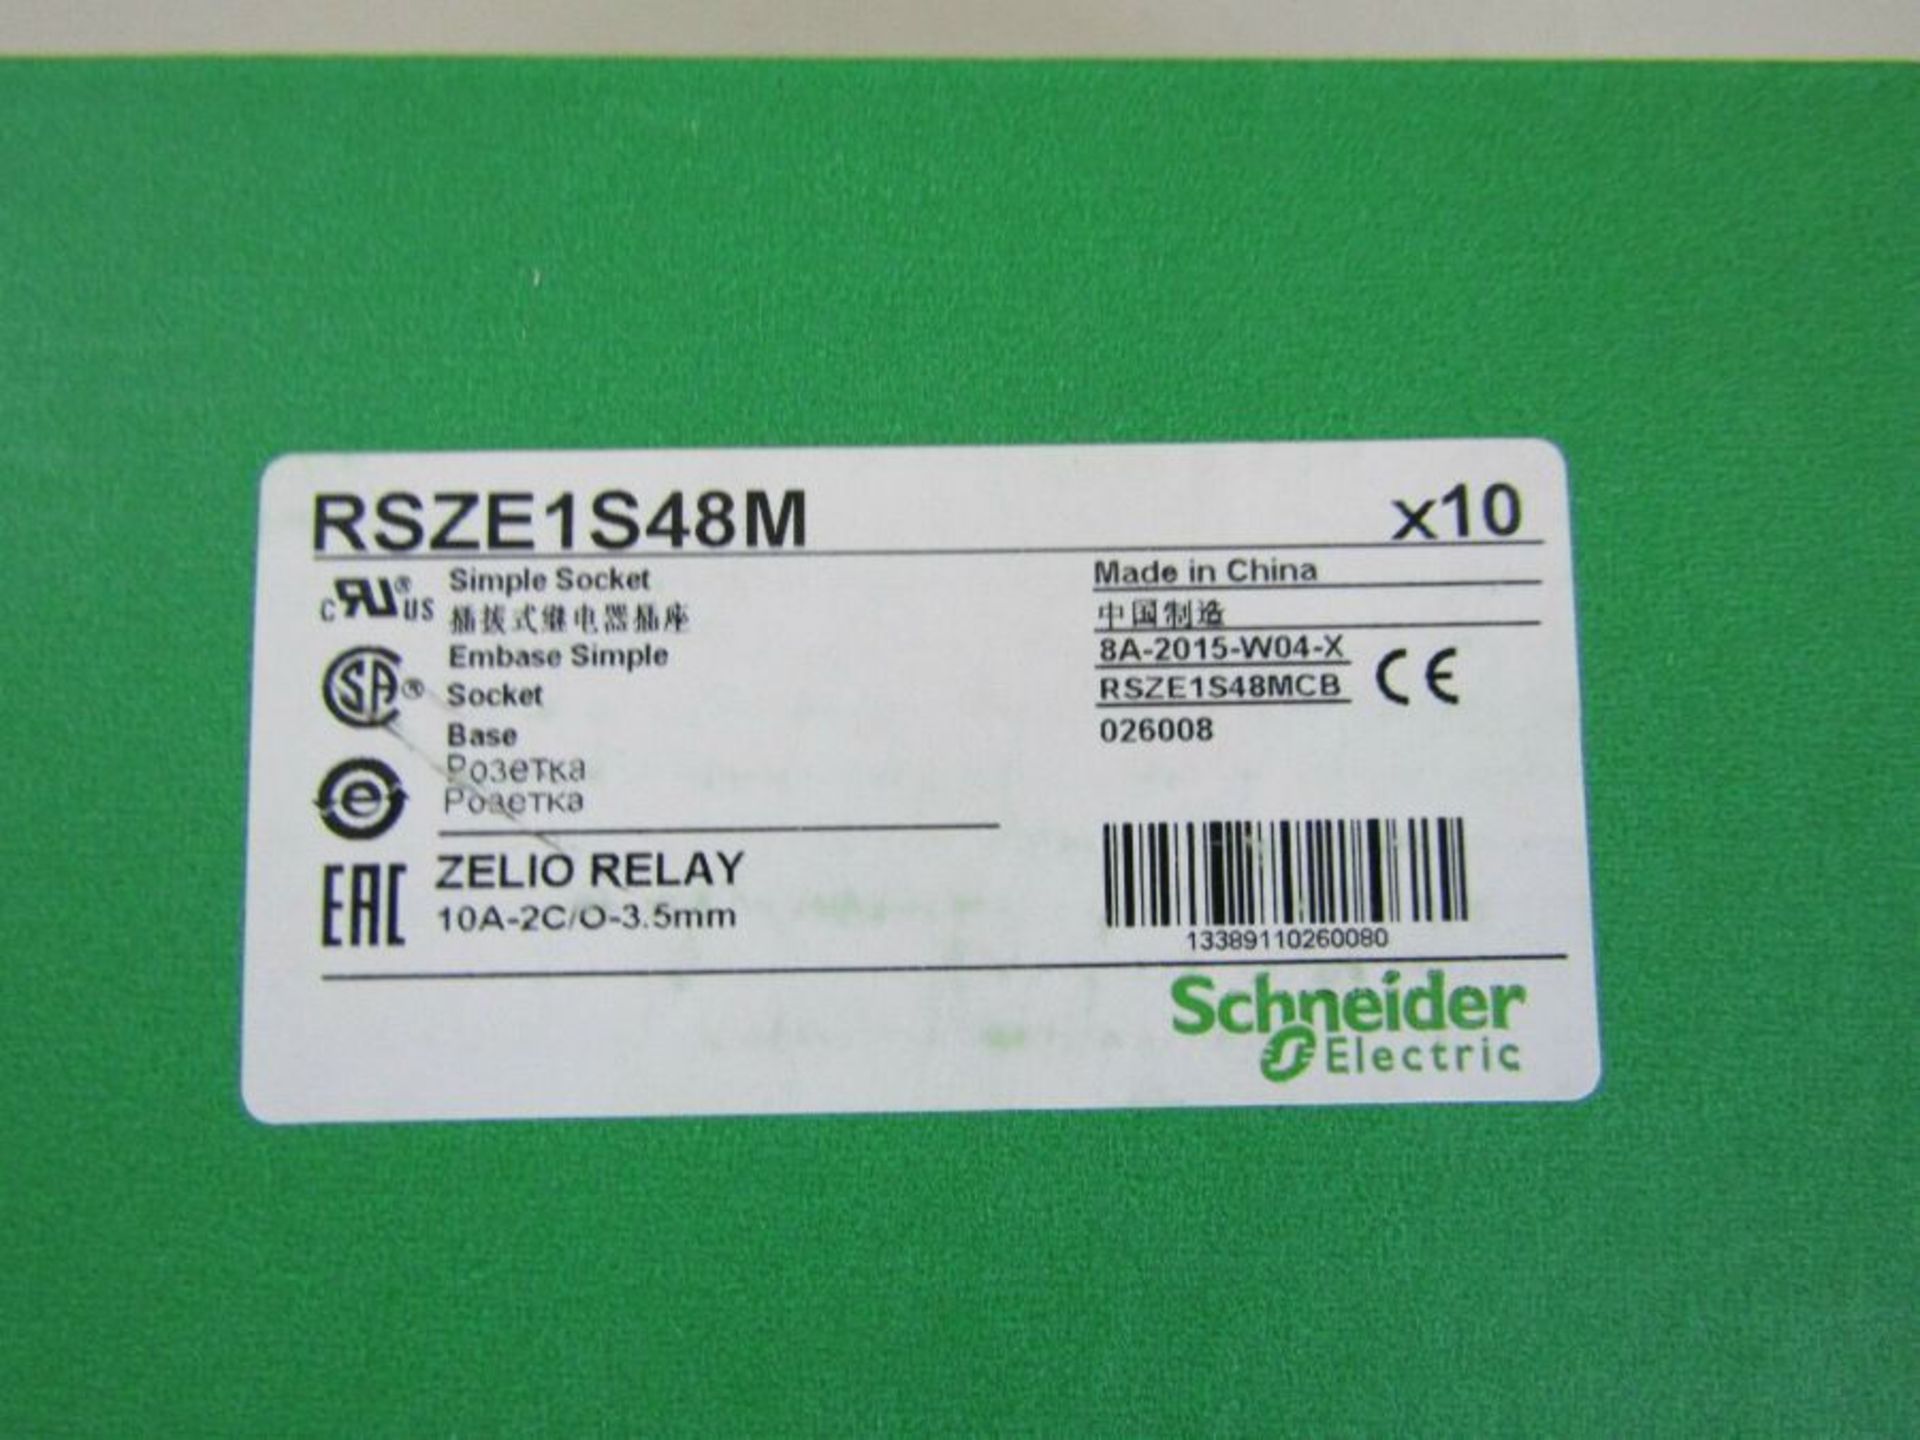 200 x SCHNEIDER RSZE1S48M Relay Socket for RSB Series - S2 - 8497667 - Image 2 of 4